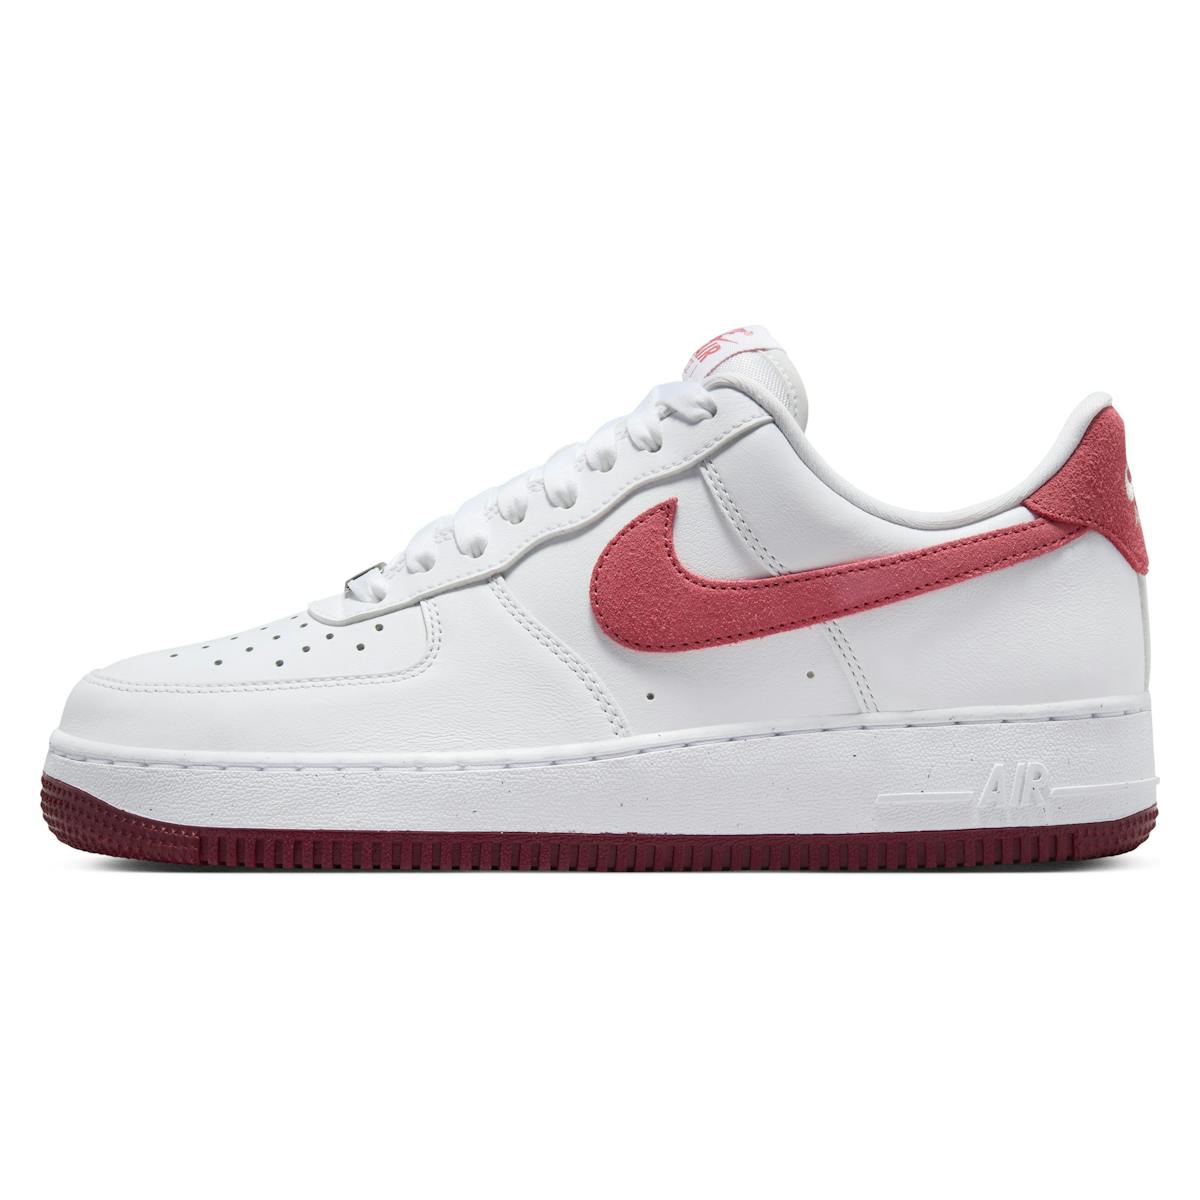 Nike Air Force 1 '07 Low Wmns "Valentine’s Day"